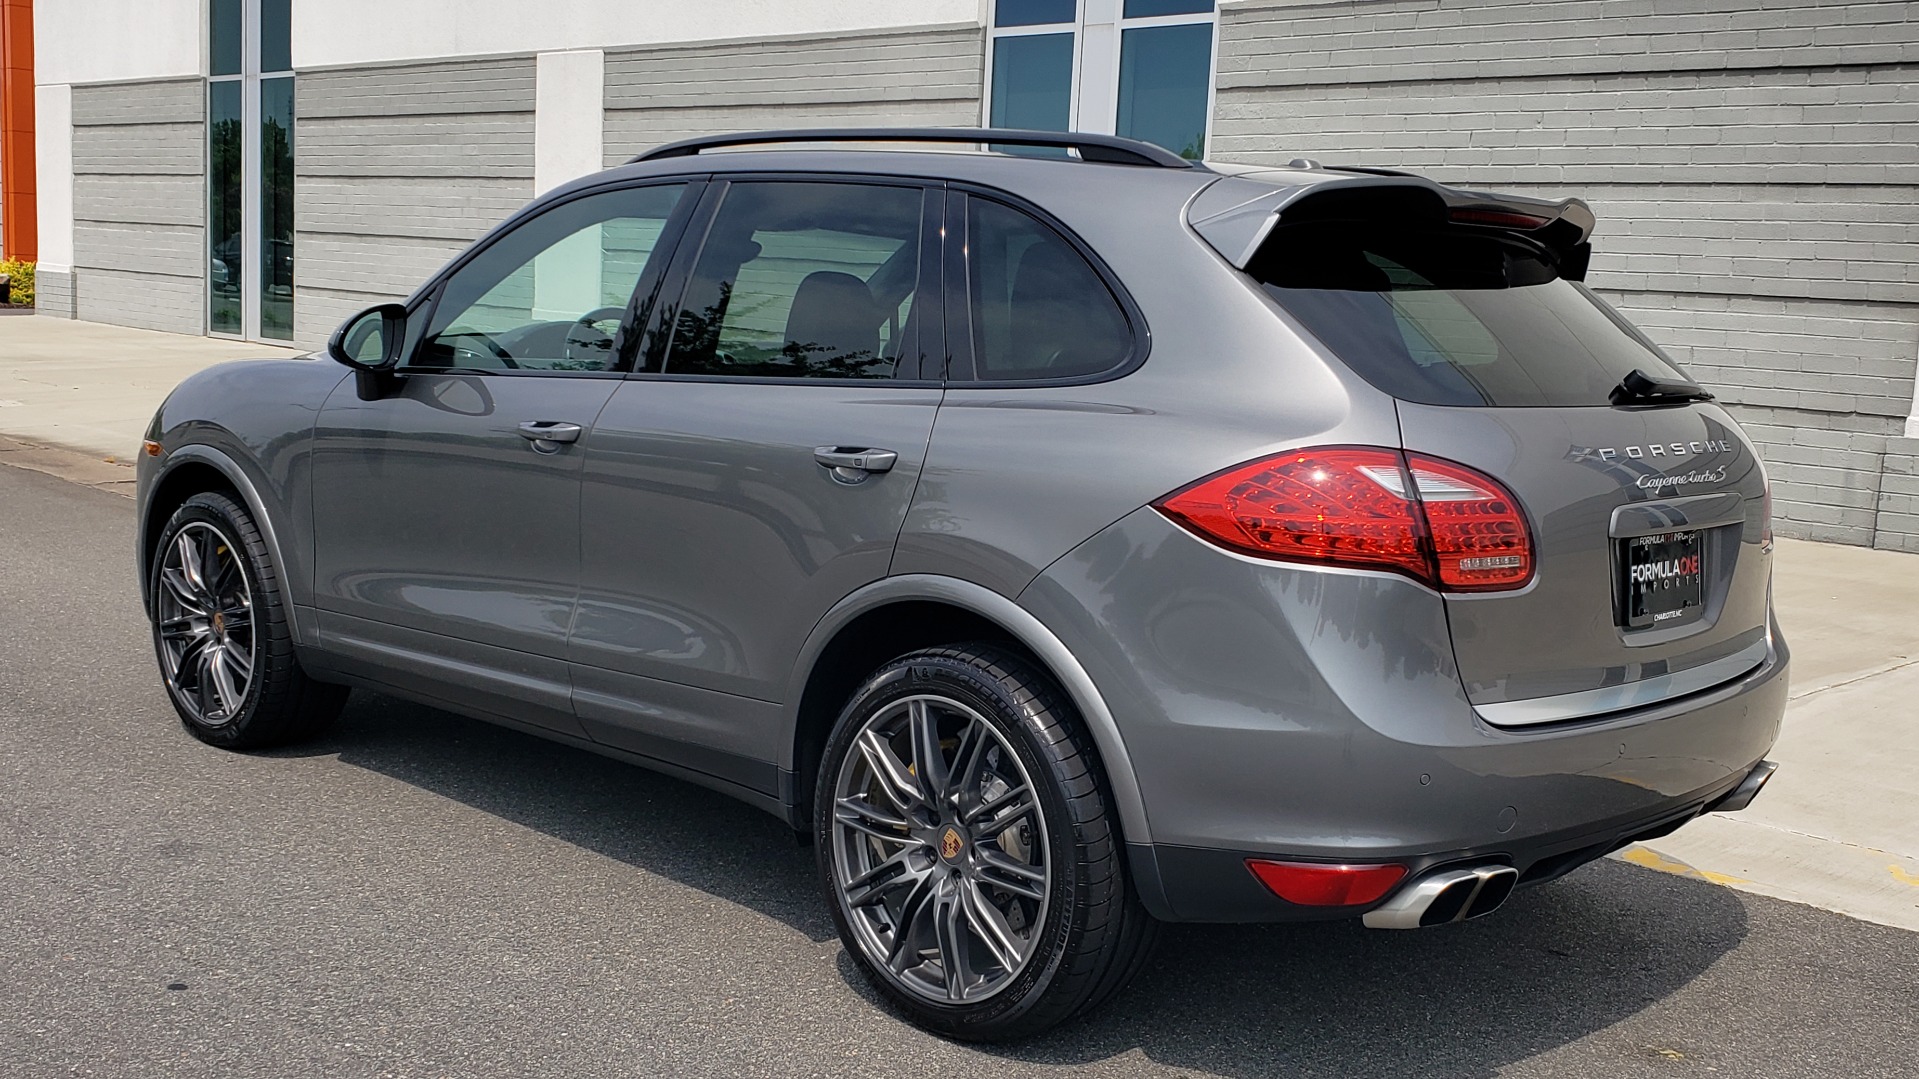 Used 2014 Porsche CAYENNE TURBO S / AWD / NAV / BOSE / PANO-ROOF / LCA / REARVIEW for sale Sold at Formula Imports in Charlotte NC 28227 6